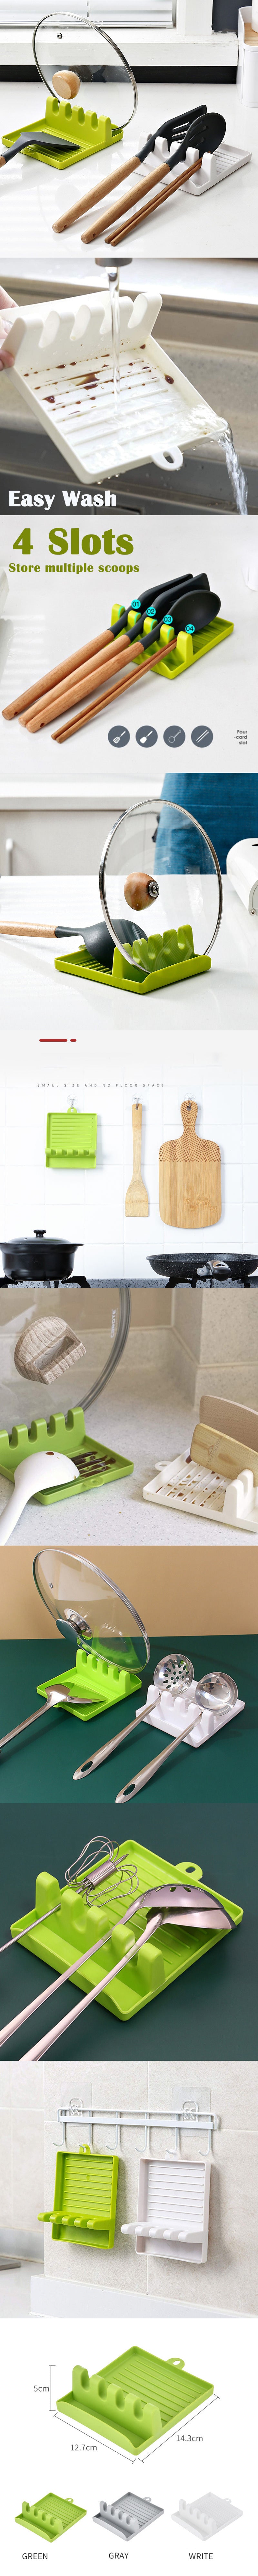 Kitchen Spoon Holders and Pot Lid Rack